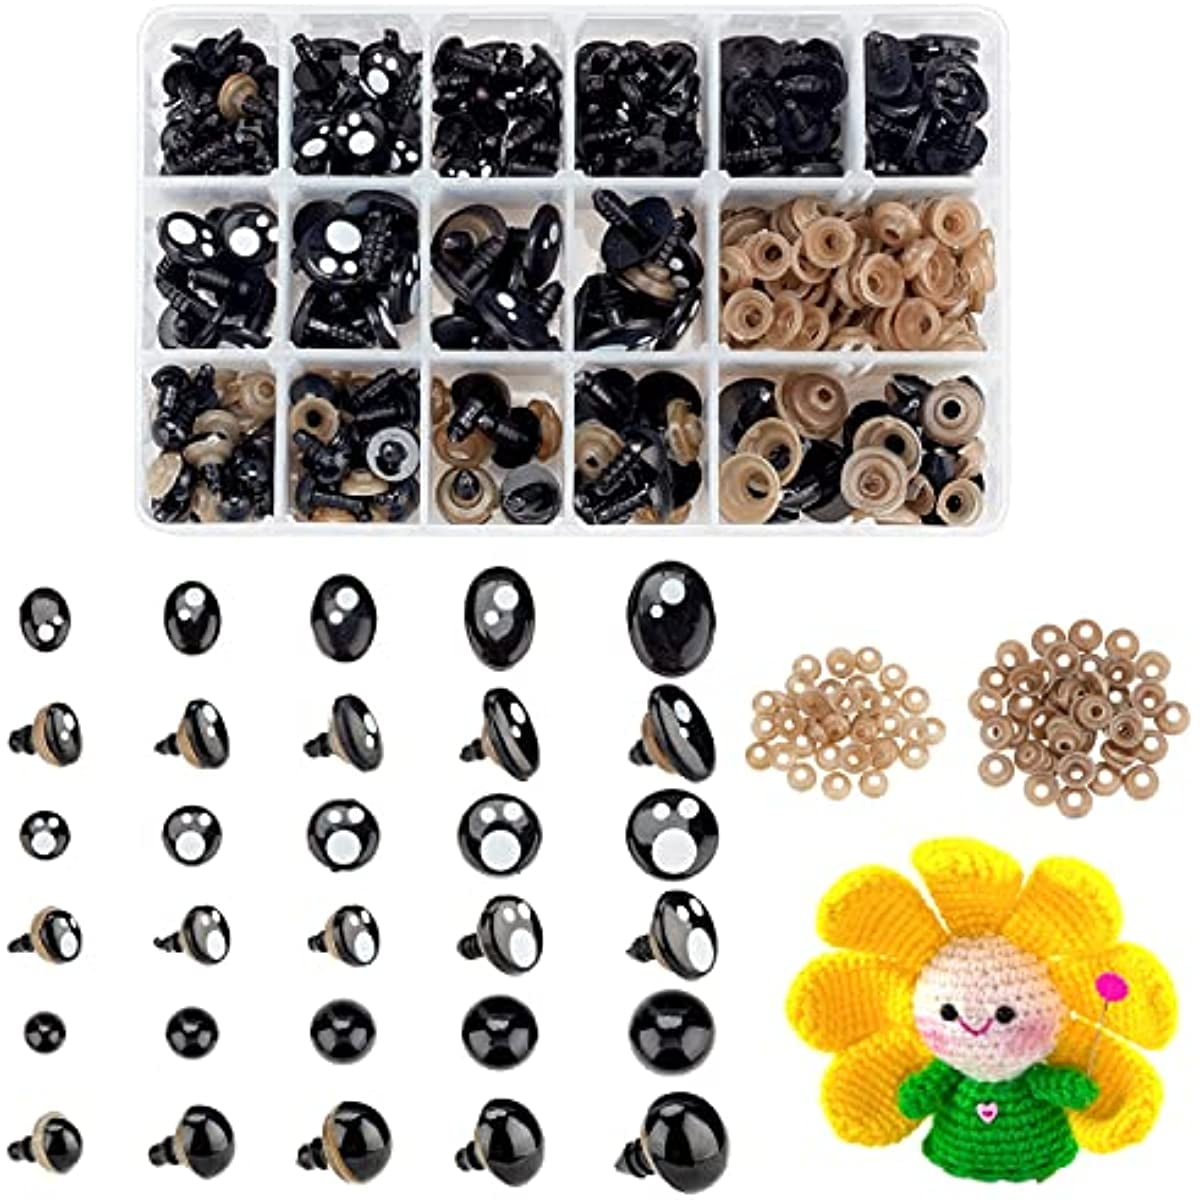 Dophee 100pcs Black Plastic Safety Eyes, Wiggly Googly Sew on Eyes, Craft Eyes, for Crochet, Puppet, Plush, Sewing Crafts, Stuffed Animals, DIY